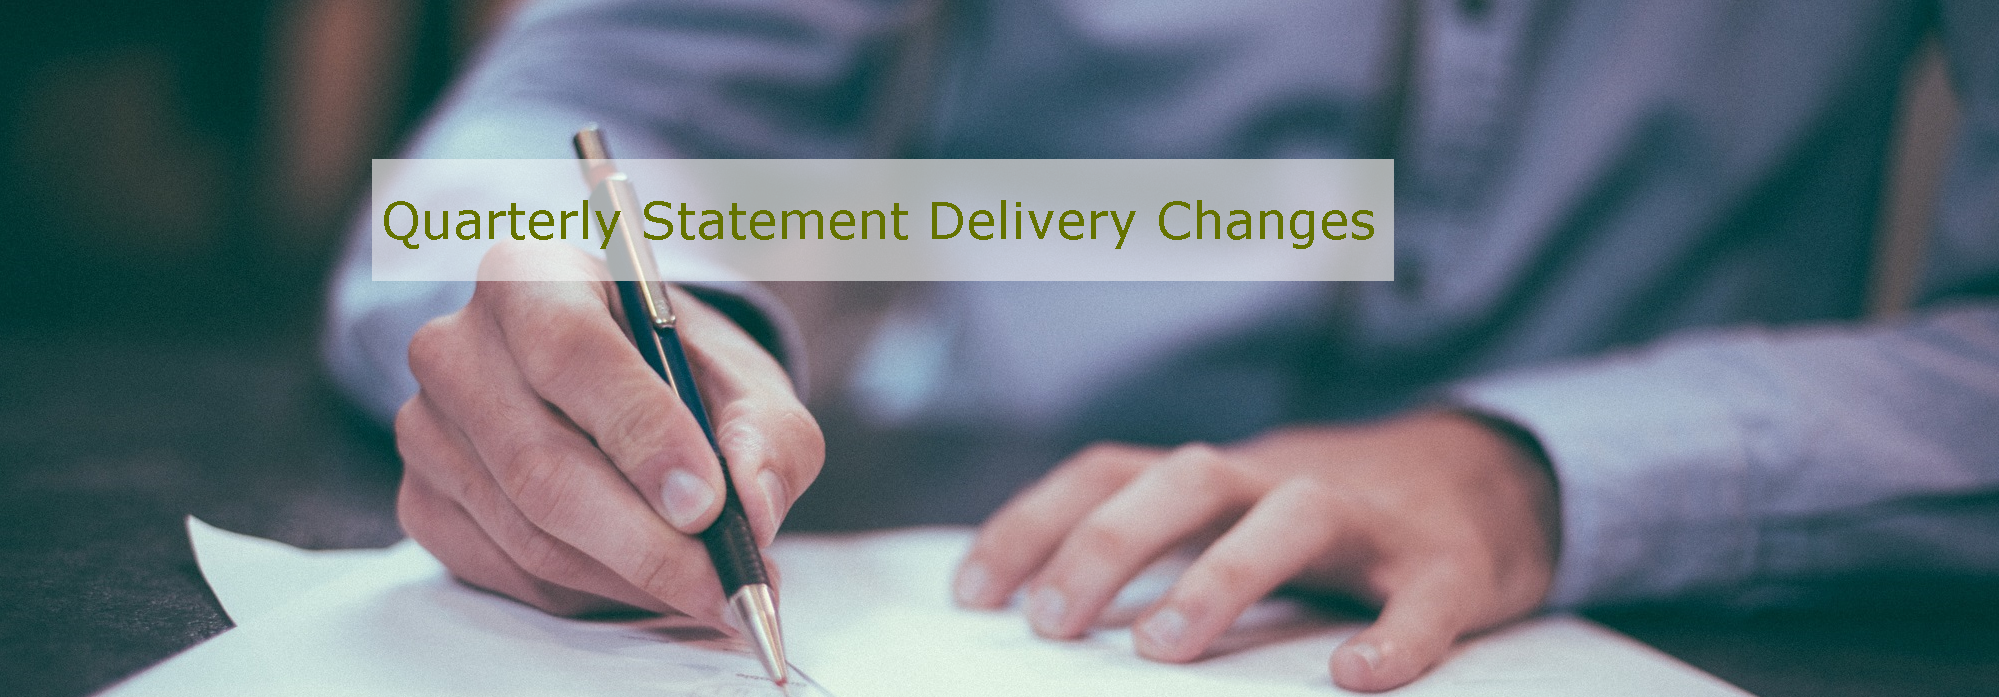 Link to more information about the Quarterly Statement Delivery Changes.